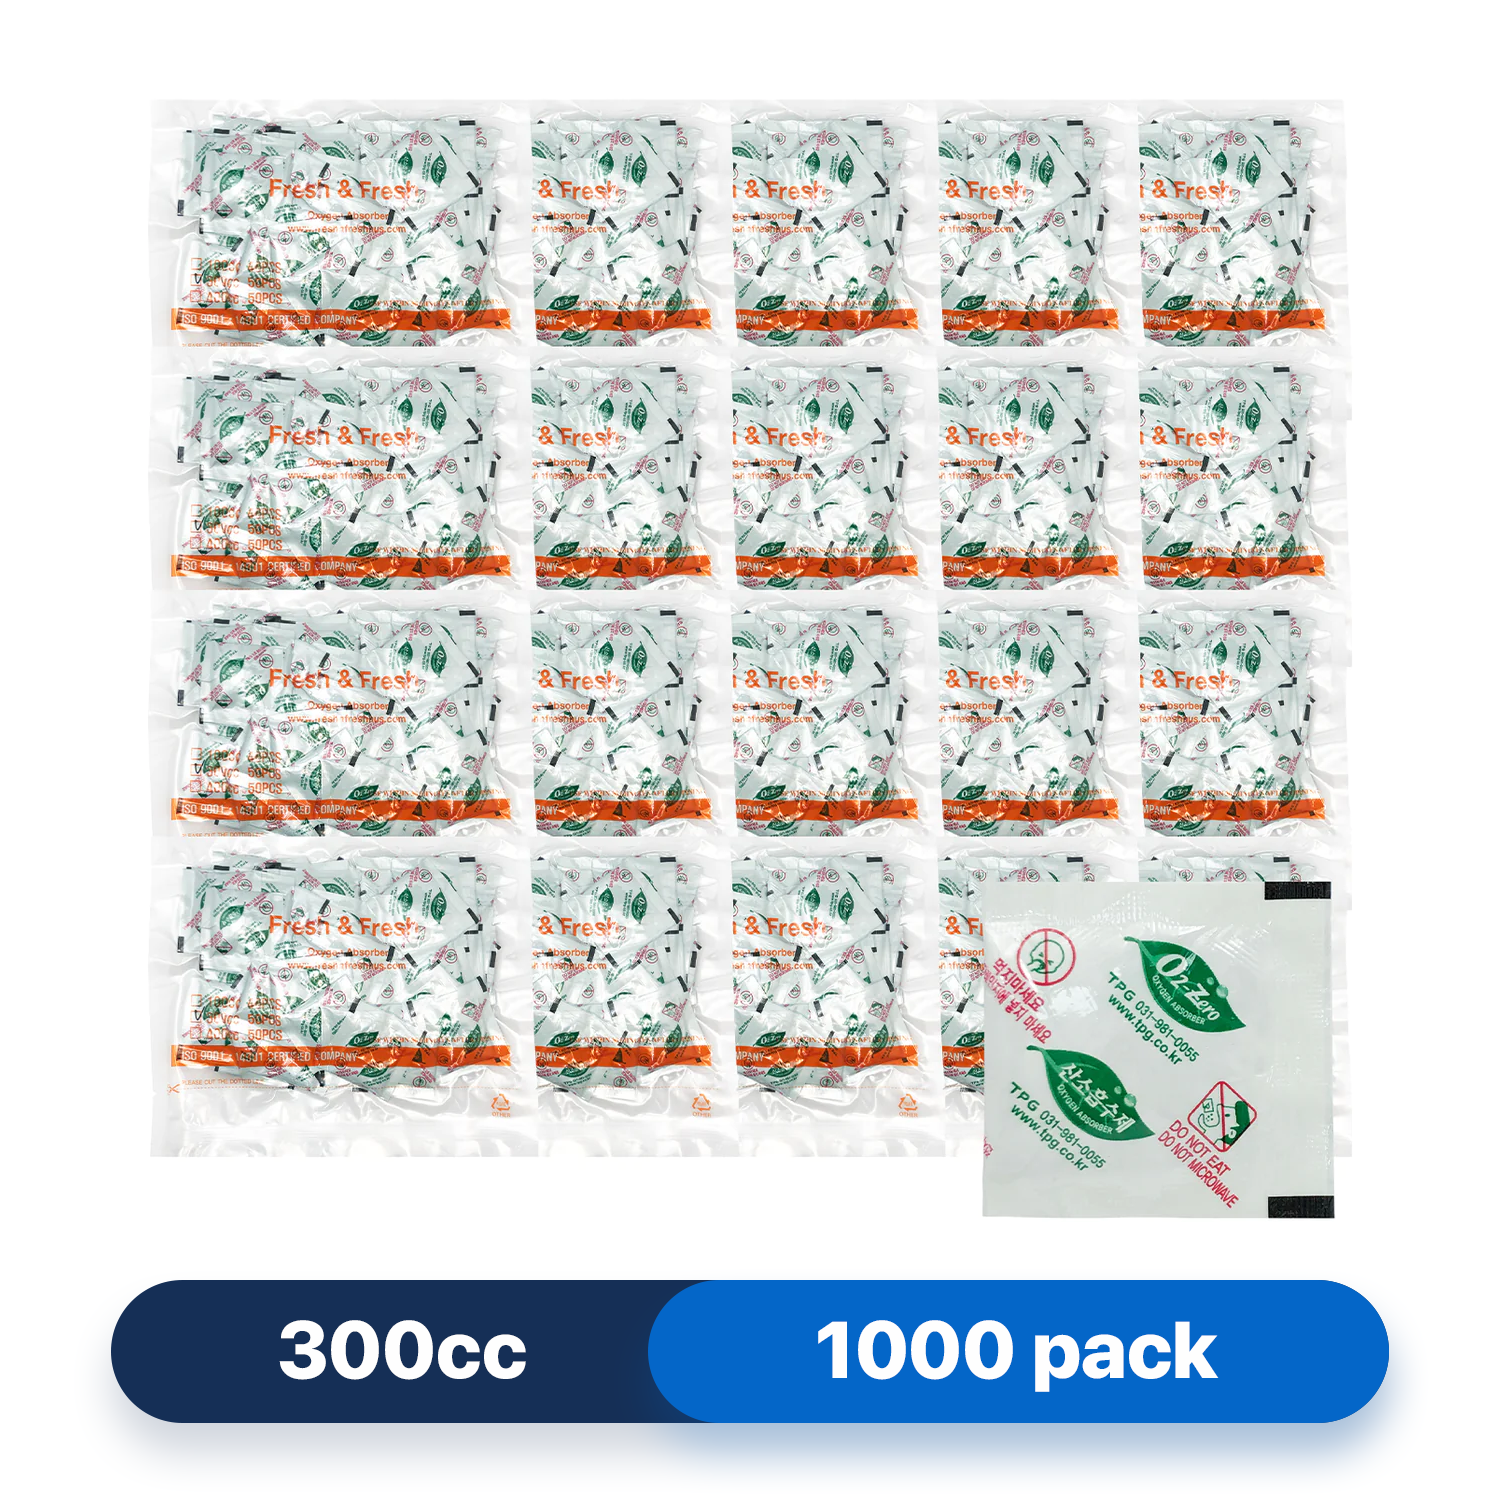 Fresh & Fresh (1000 Packs) 300 CC Premium Oxygen Absorbers(20 Bag of 50 Packets) - ISO 9001 & 14001 Certified Facility Manufactured